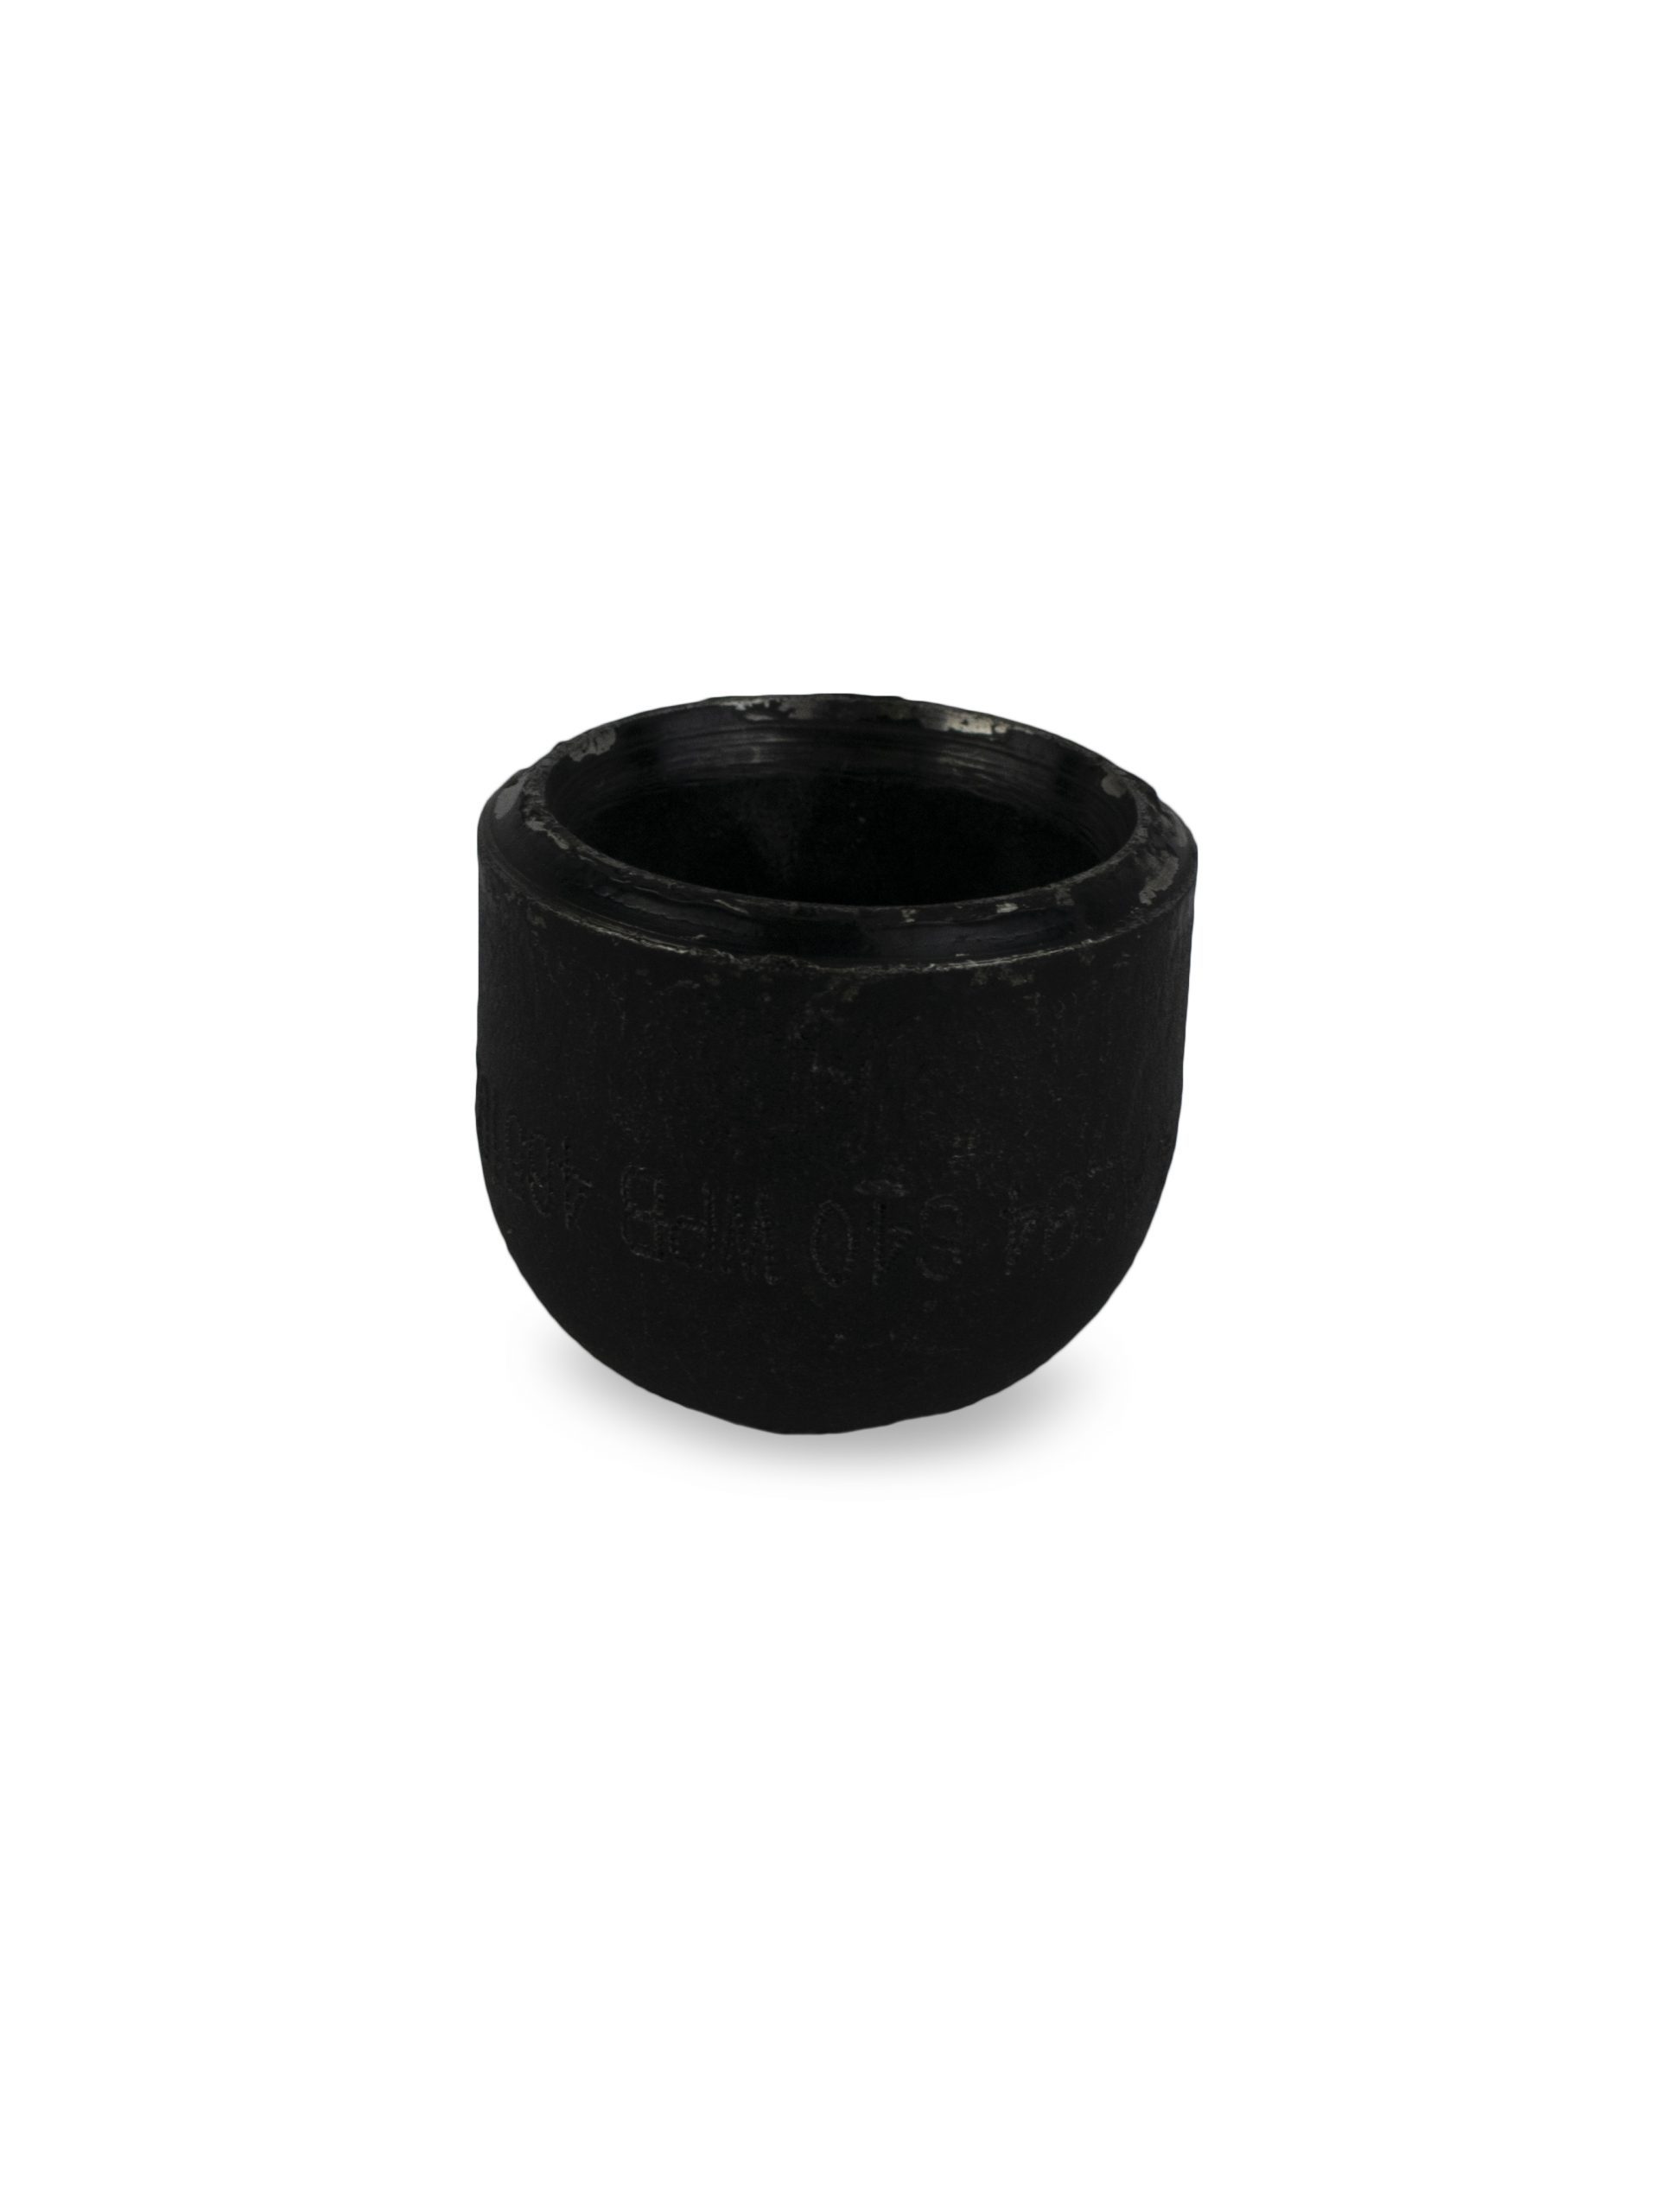 CARBON STEEL END CAP 2 Inches SCHEDULE 80 from Gas Equipment Company Llc Abu Dhabi, UNITED ARAB EMIRATES